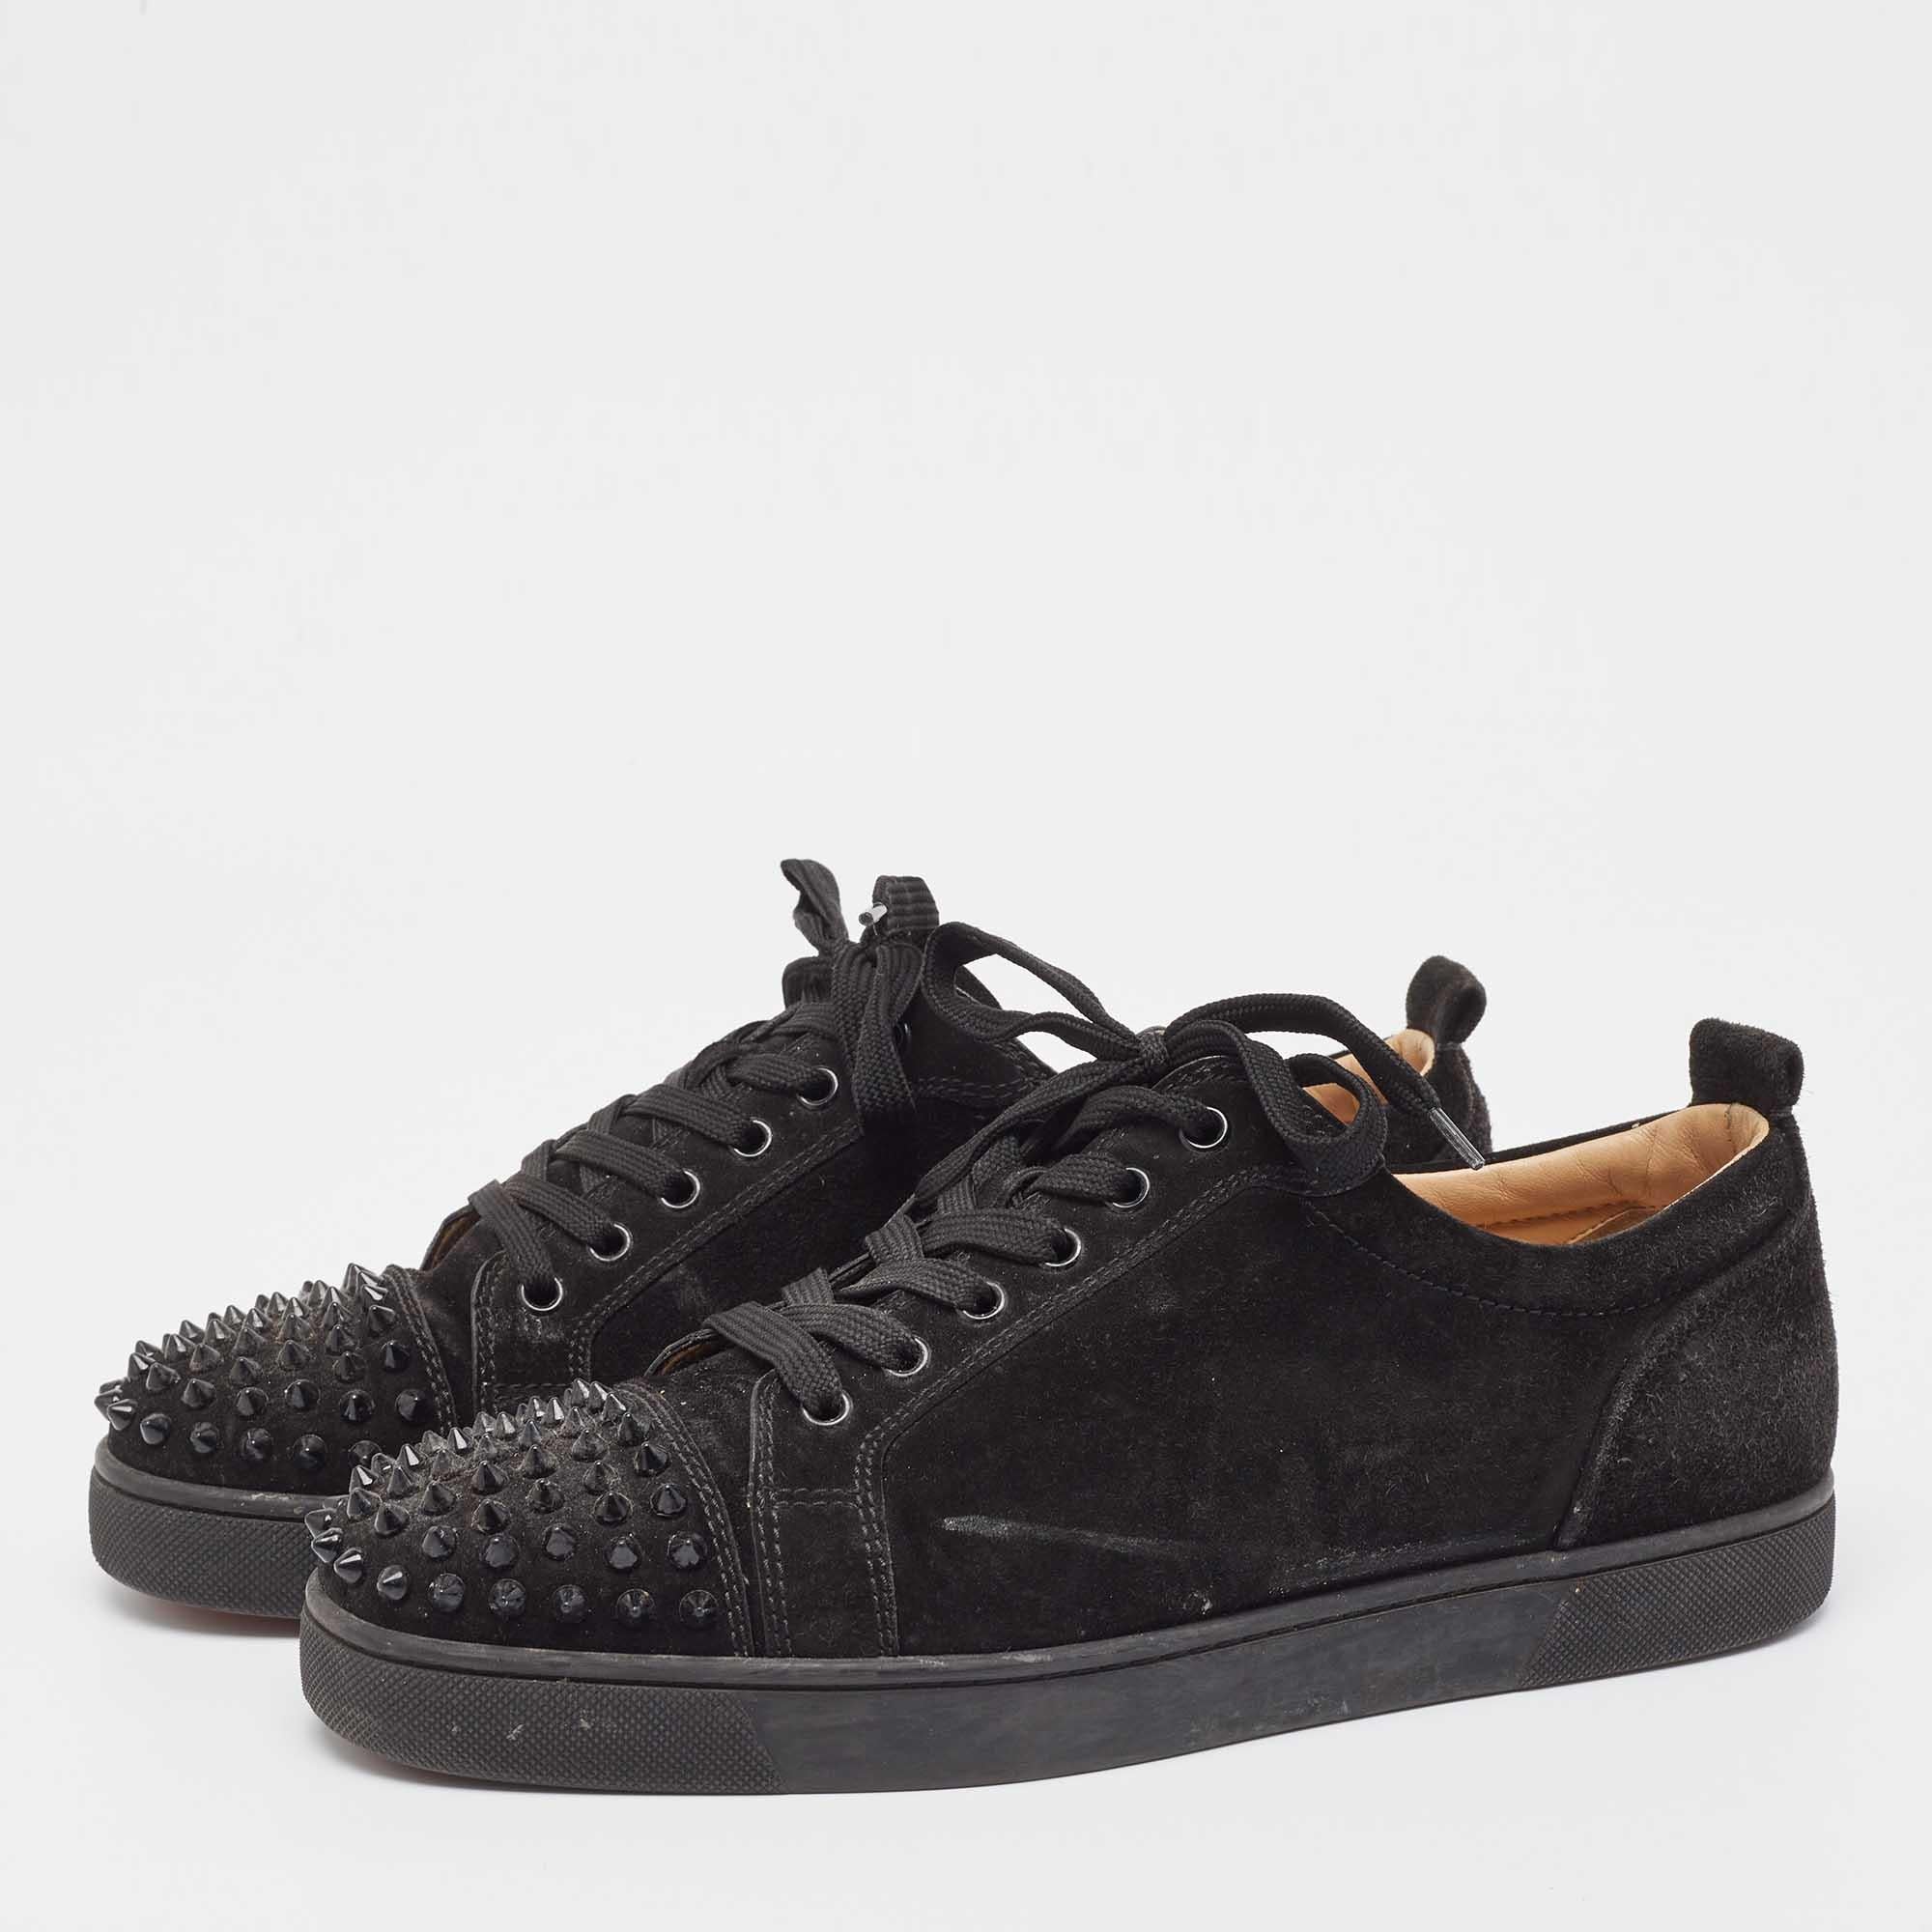 Christian Louboutin Black Suede Louise Spike Low Top Sneakers Size 43 4